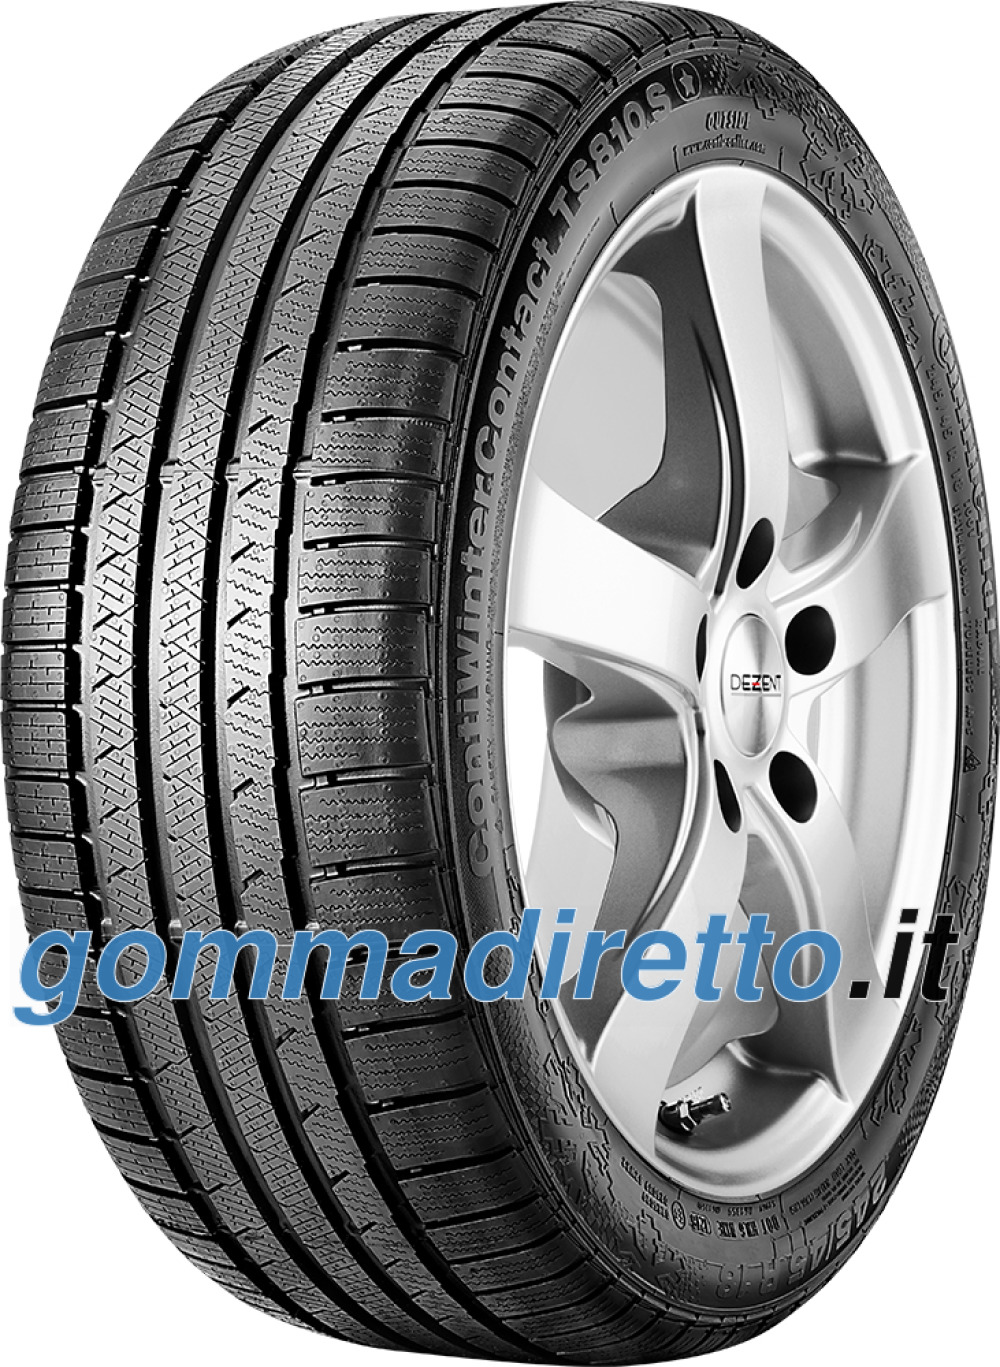 Image of Continental ContiWinterContact TS 810 S ( 255/40 R18 99V XL, N1 )